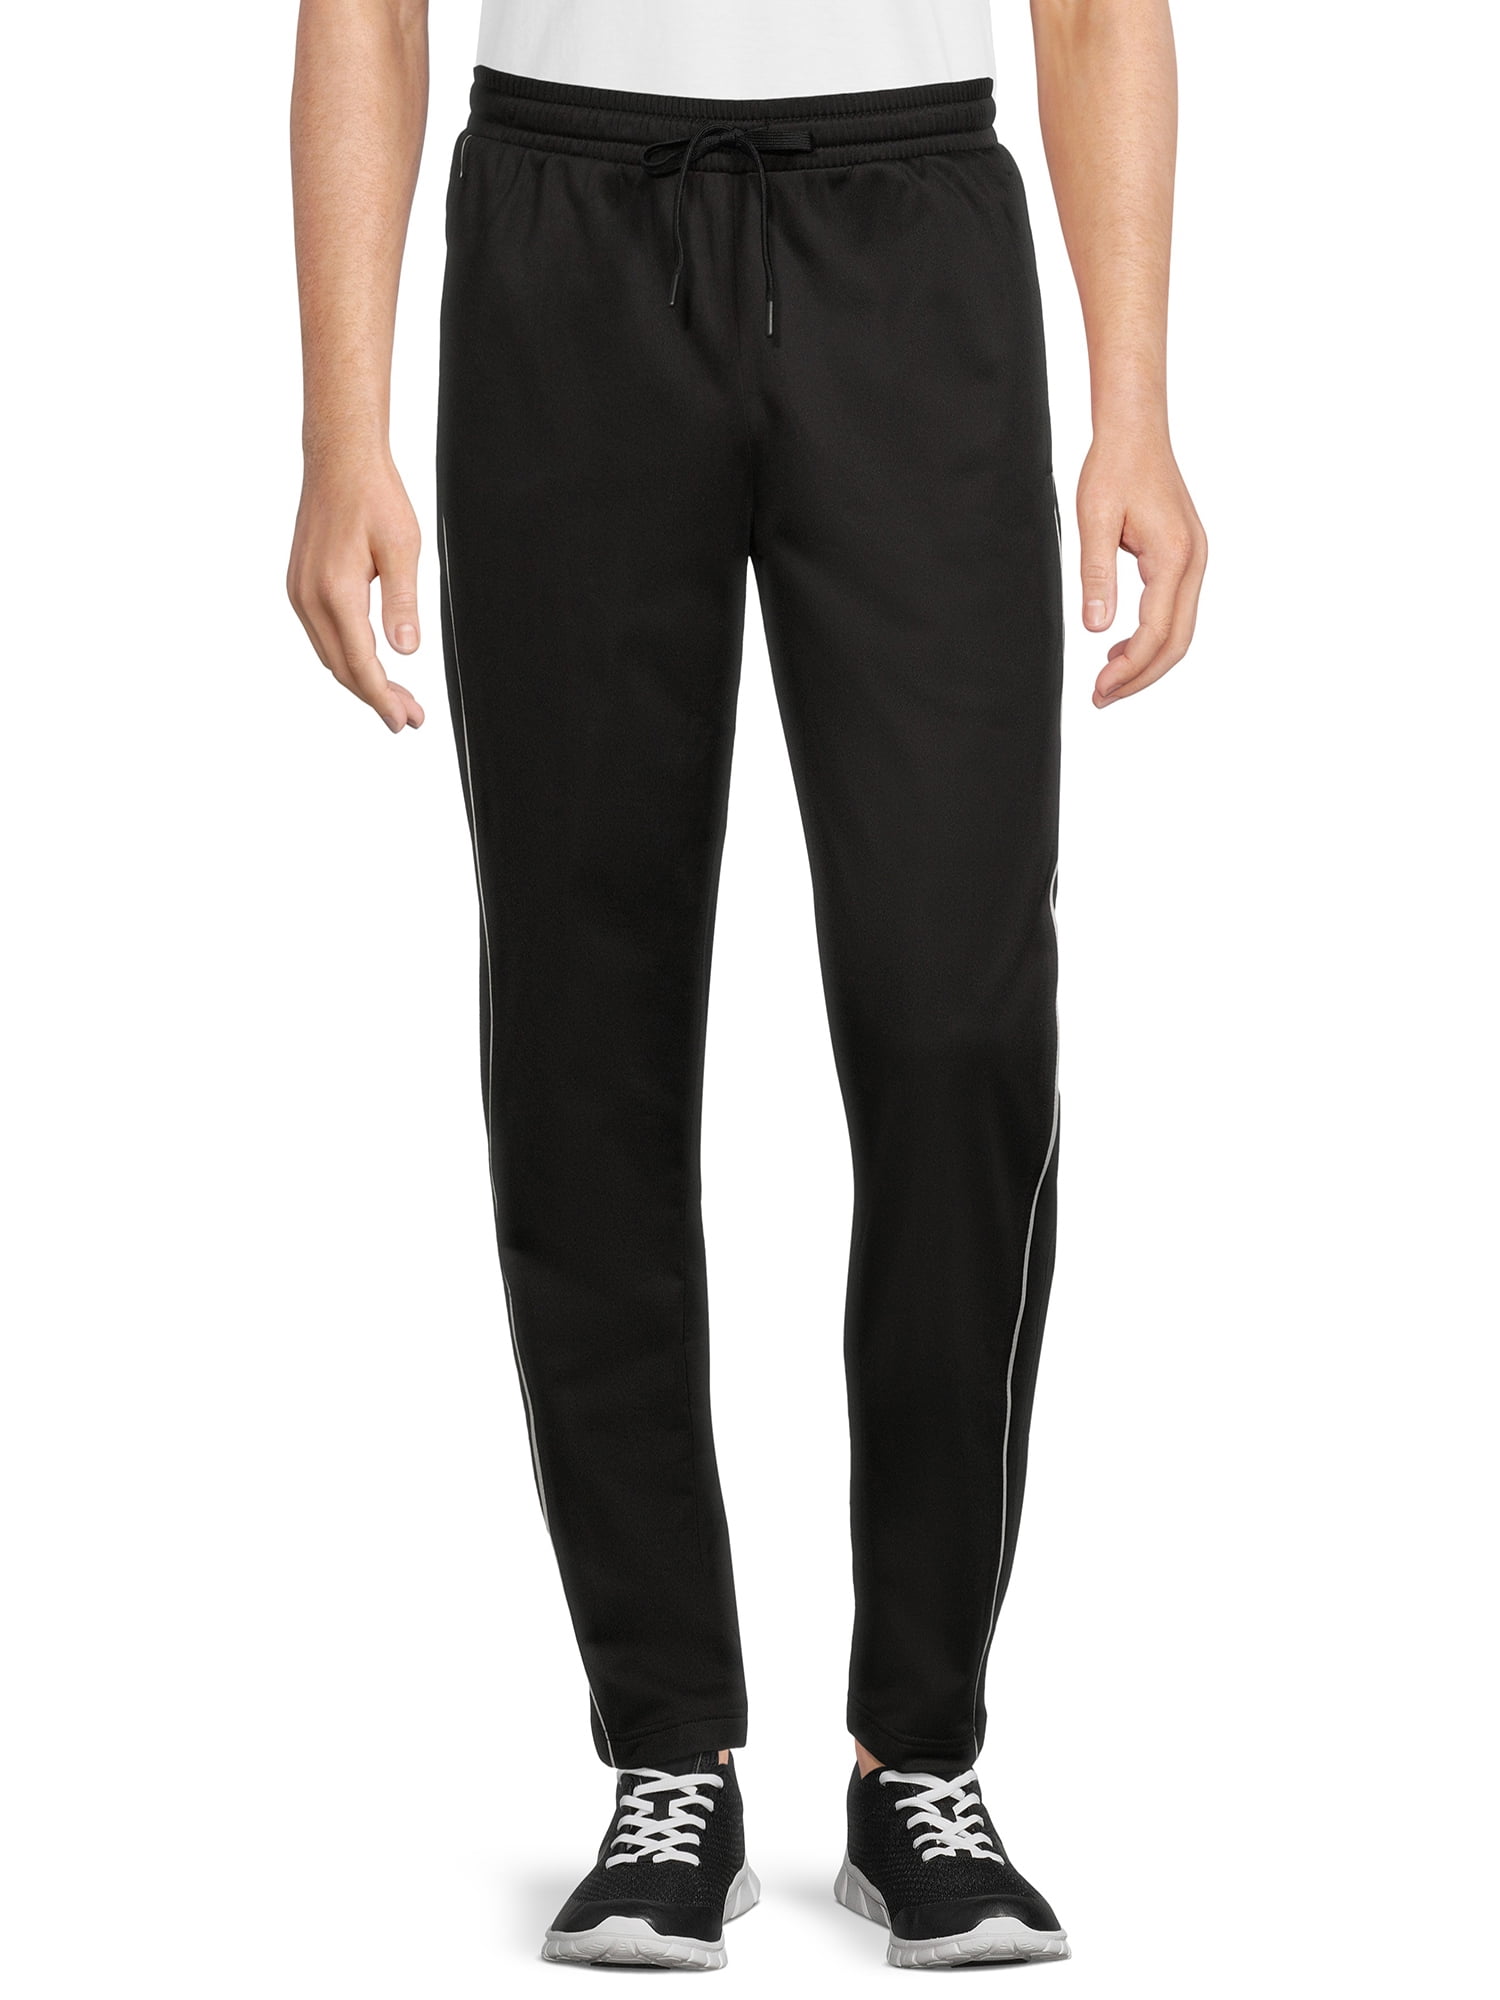 Combed Cotton Black Regular Fit Track pants with Pockets-thephaco.com.vn